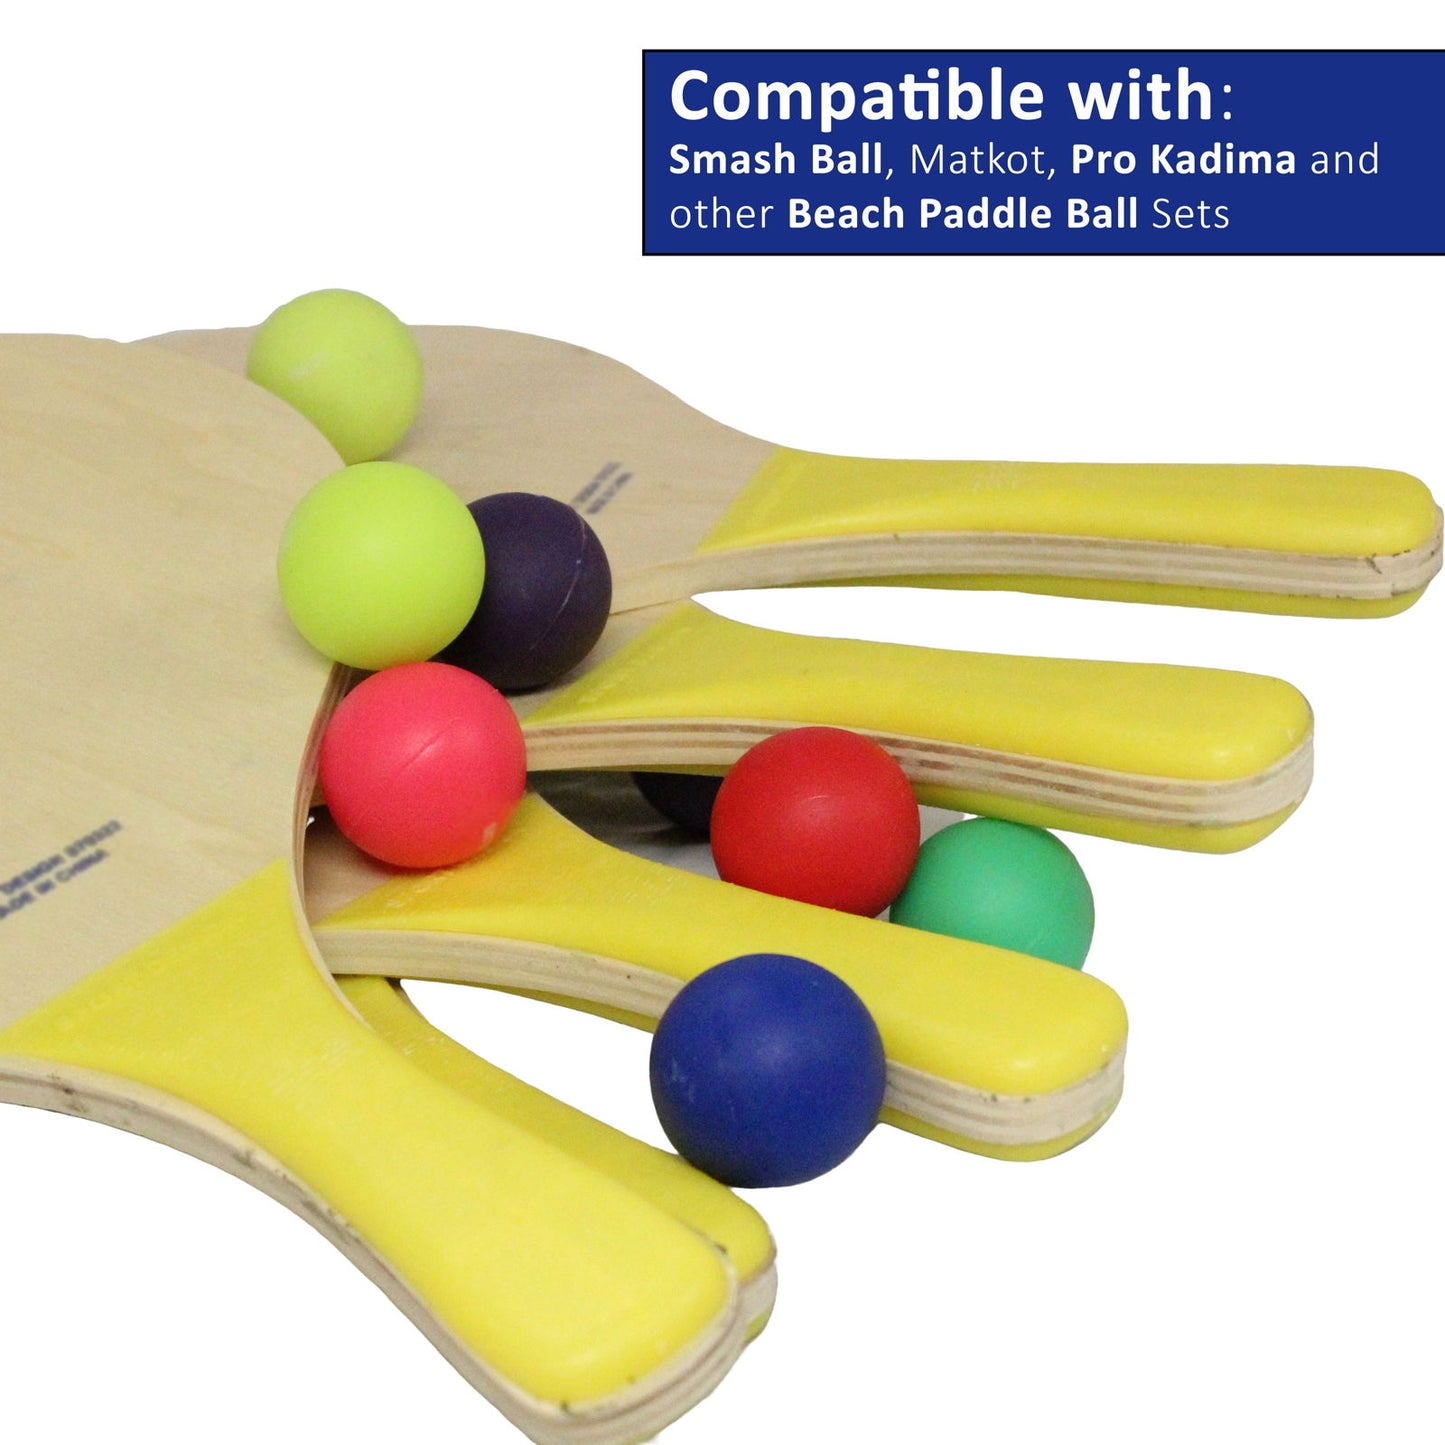 W4W Beach Paddle Ball replacement balls – Extra Balls for Pro Kadima & Smashball Racket (Set of 7 Balls) - Ages 15+ - W4W Products 